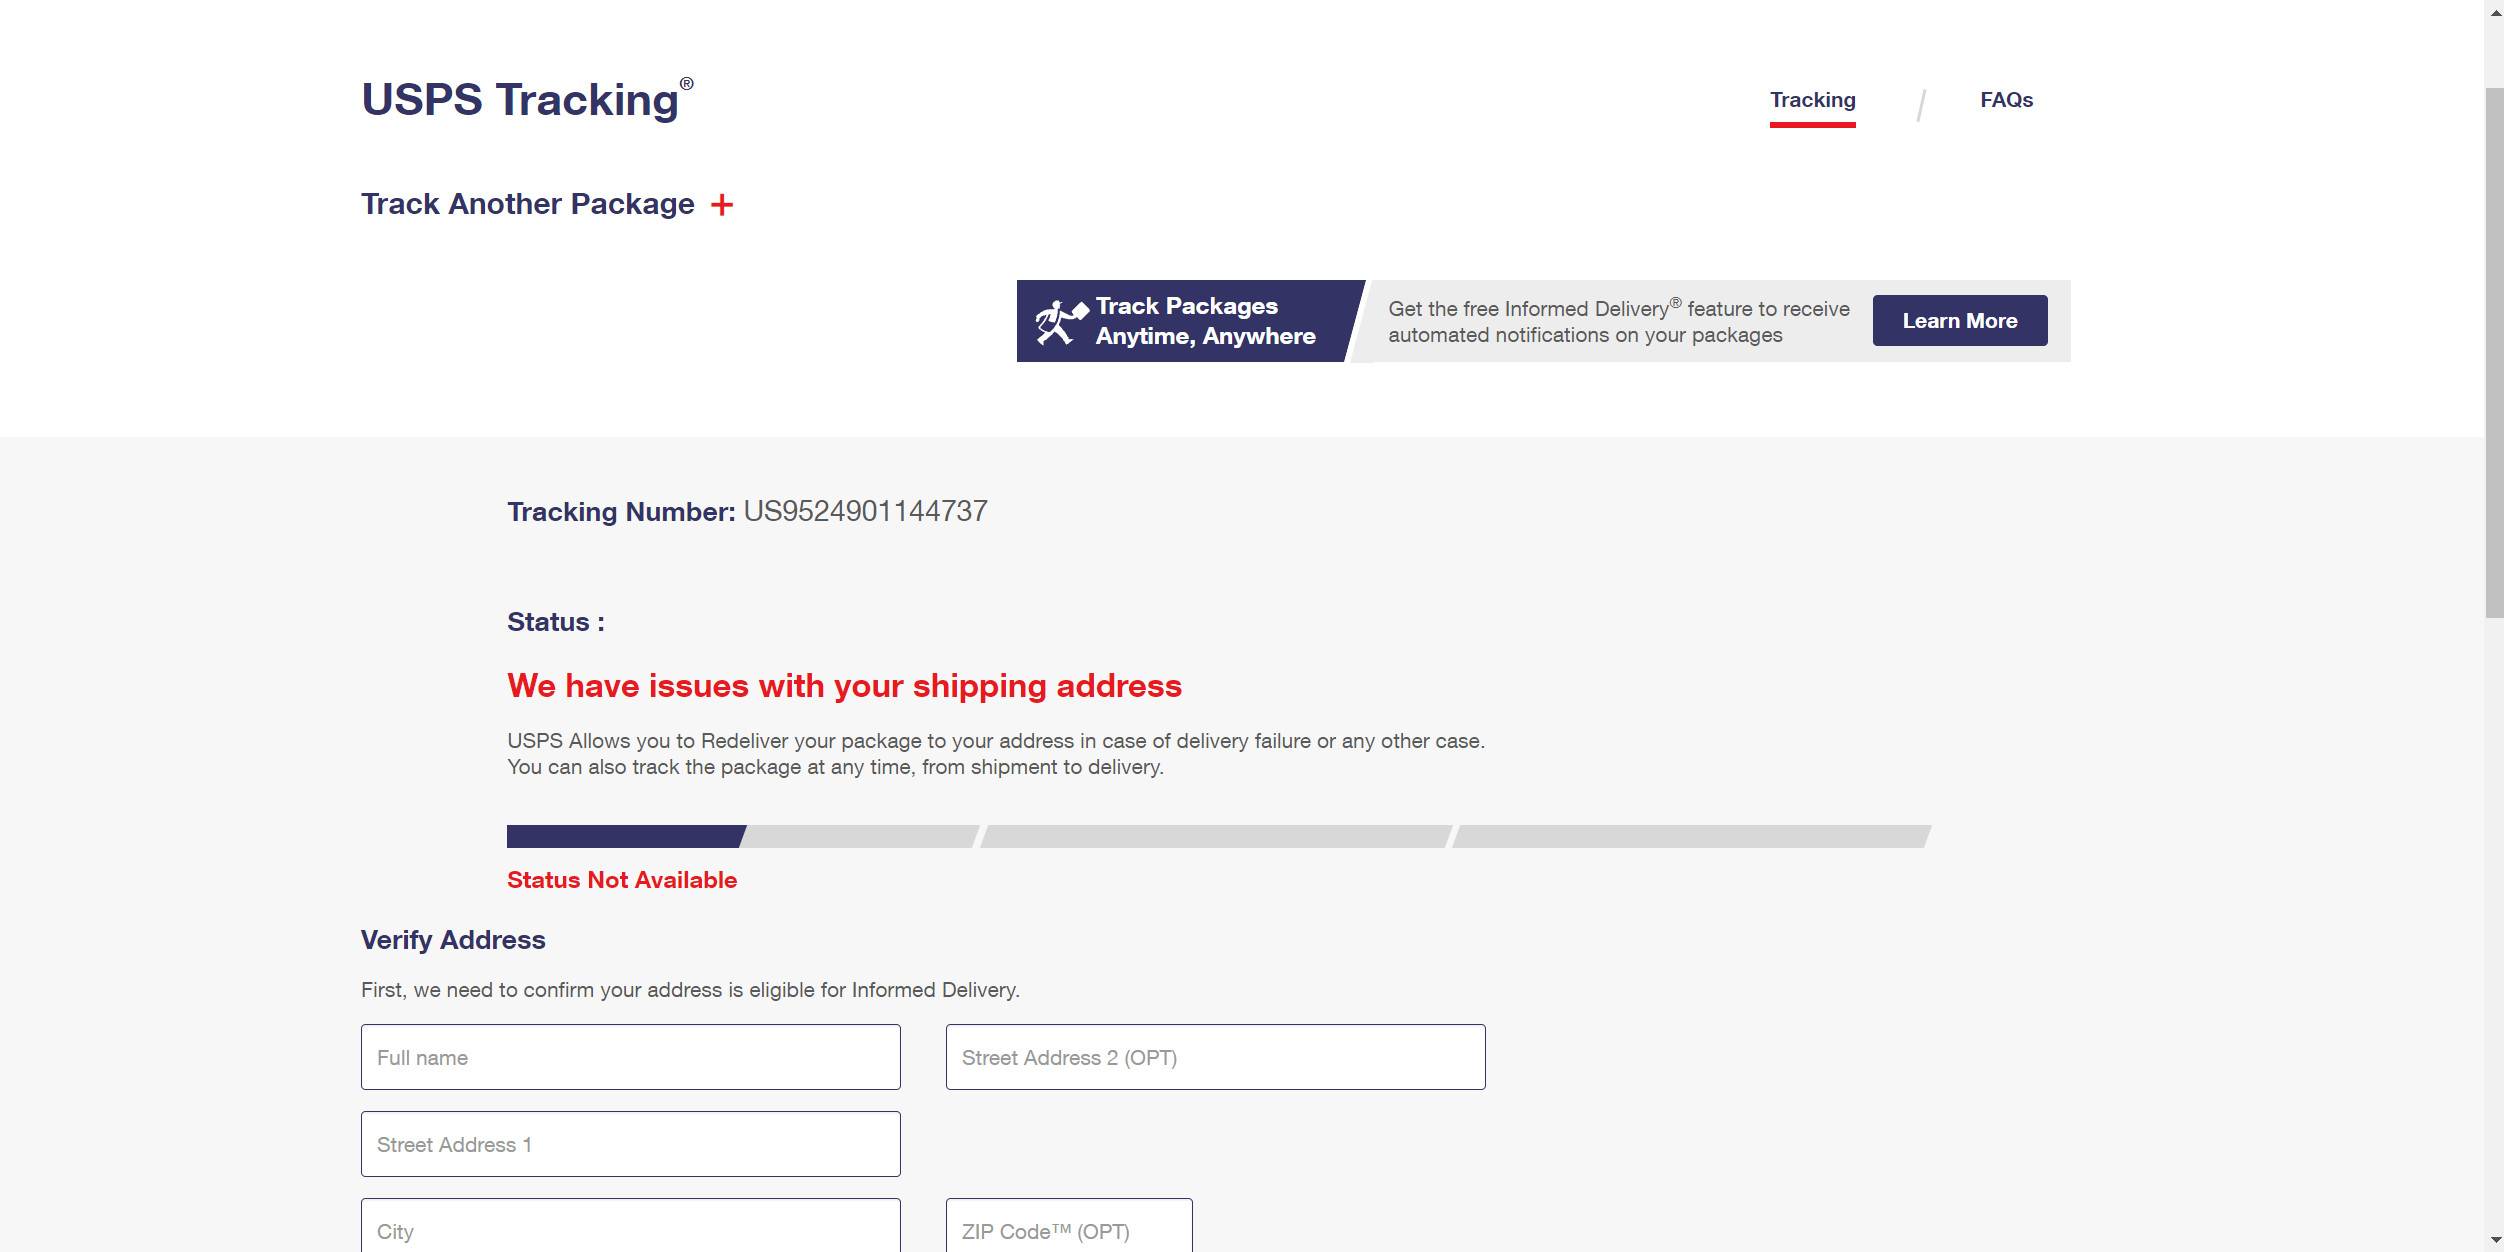 How to Find a USPS Tracking Number